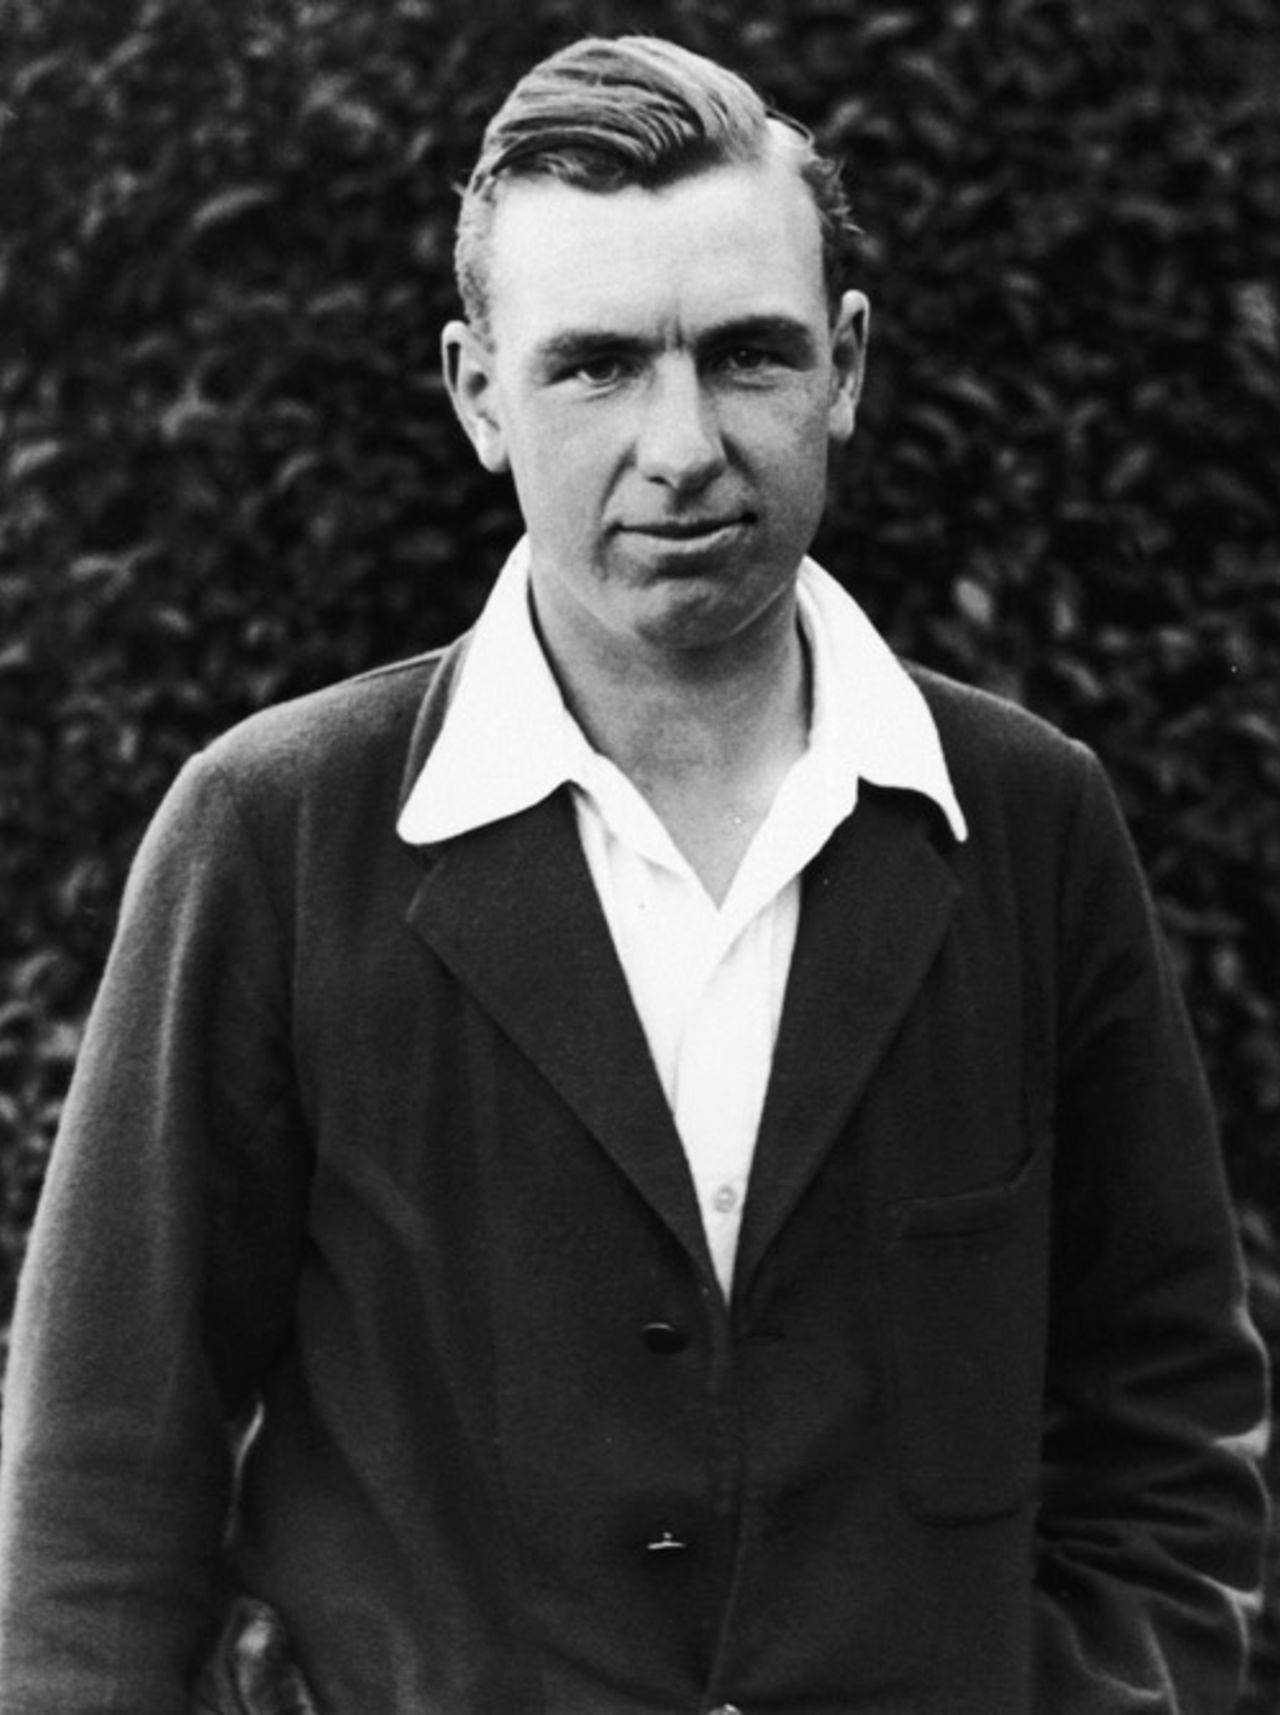 Jim Parks, the England and Sussex player